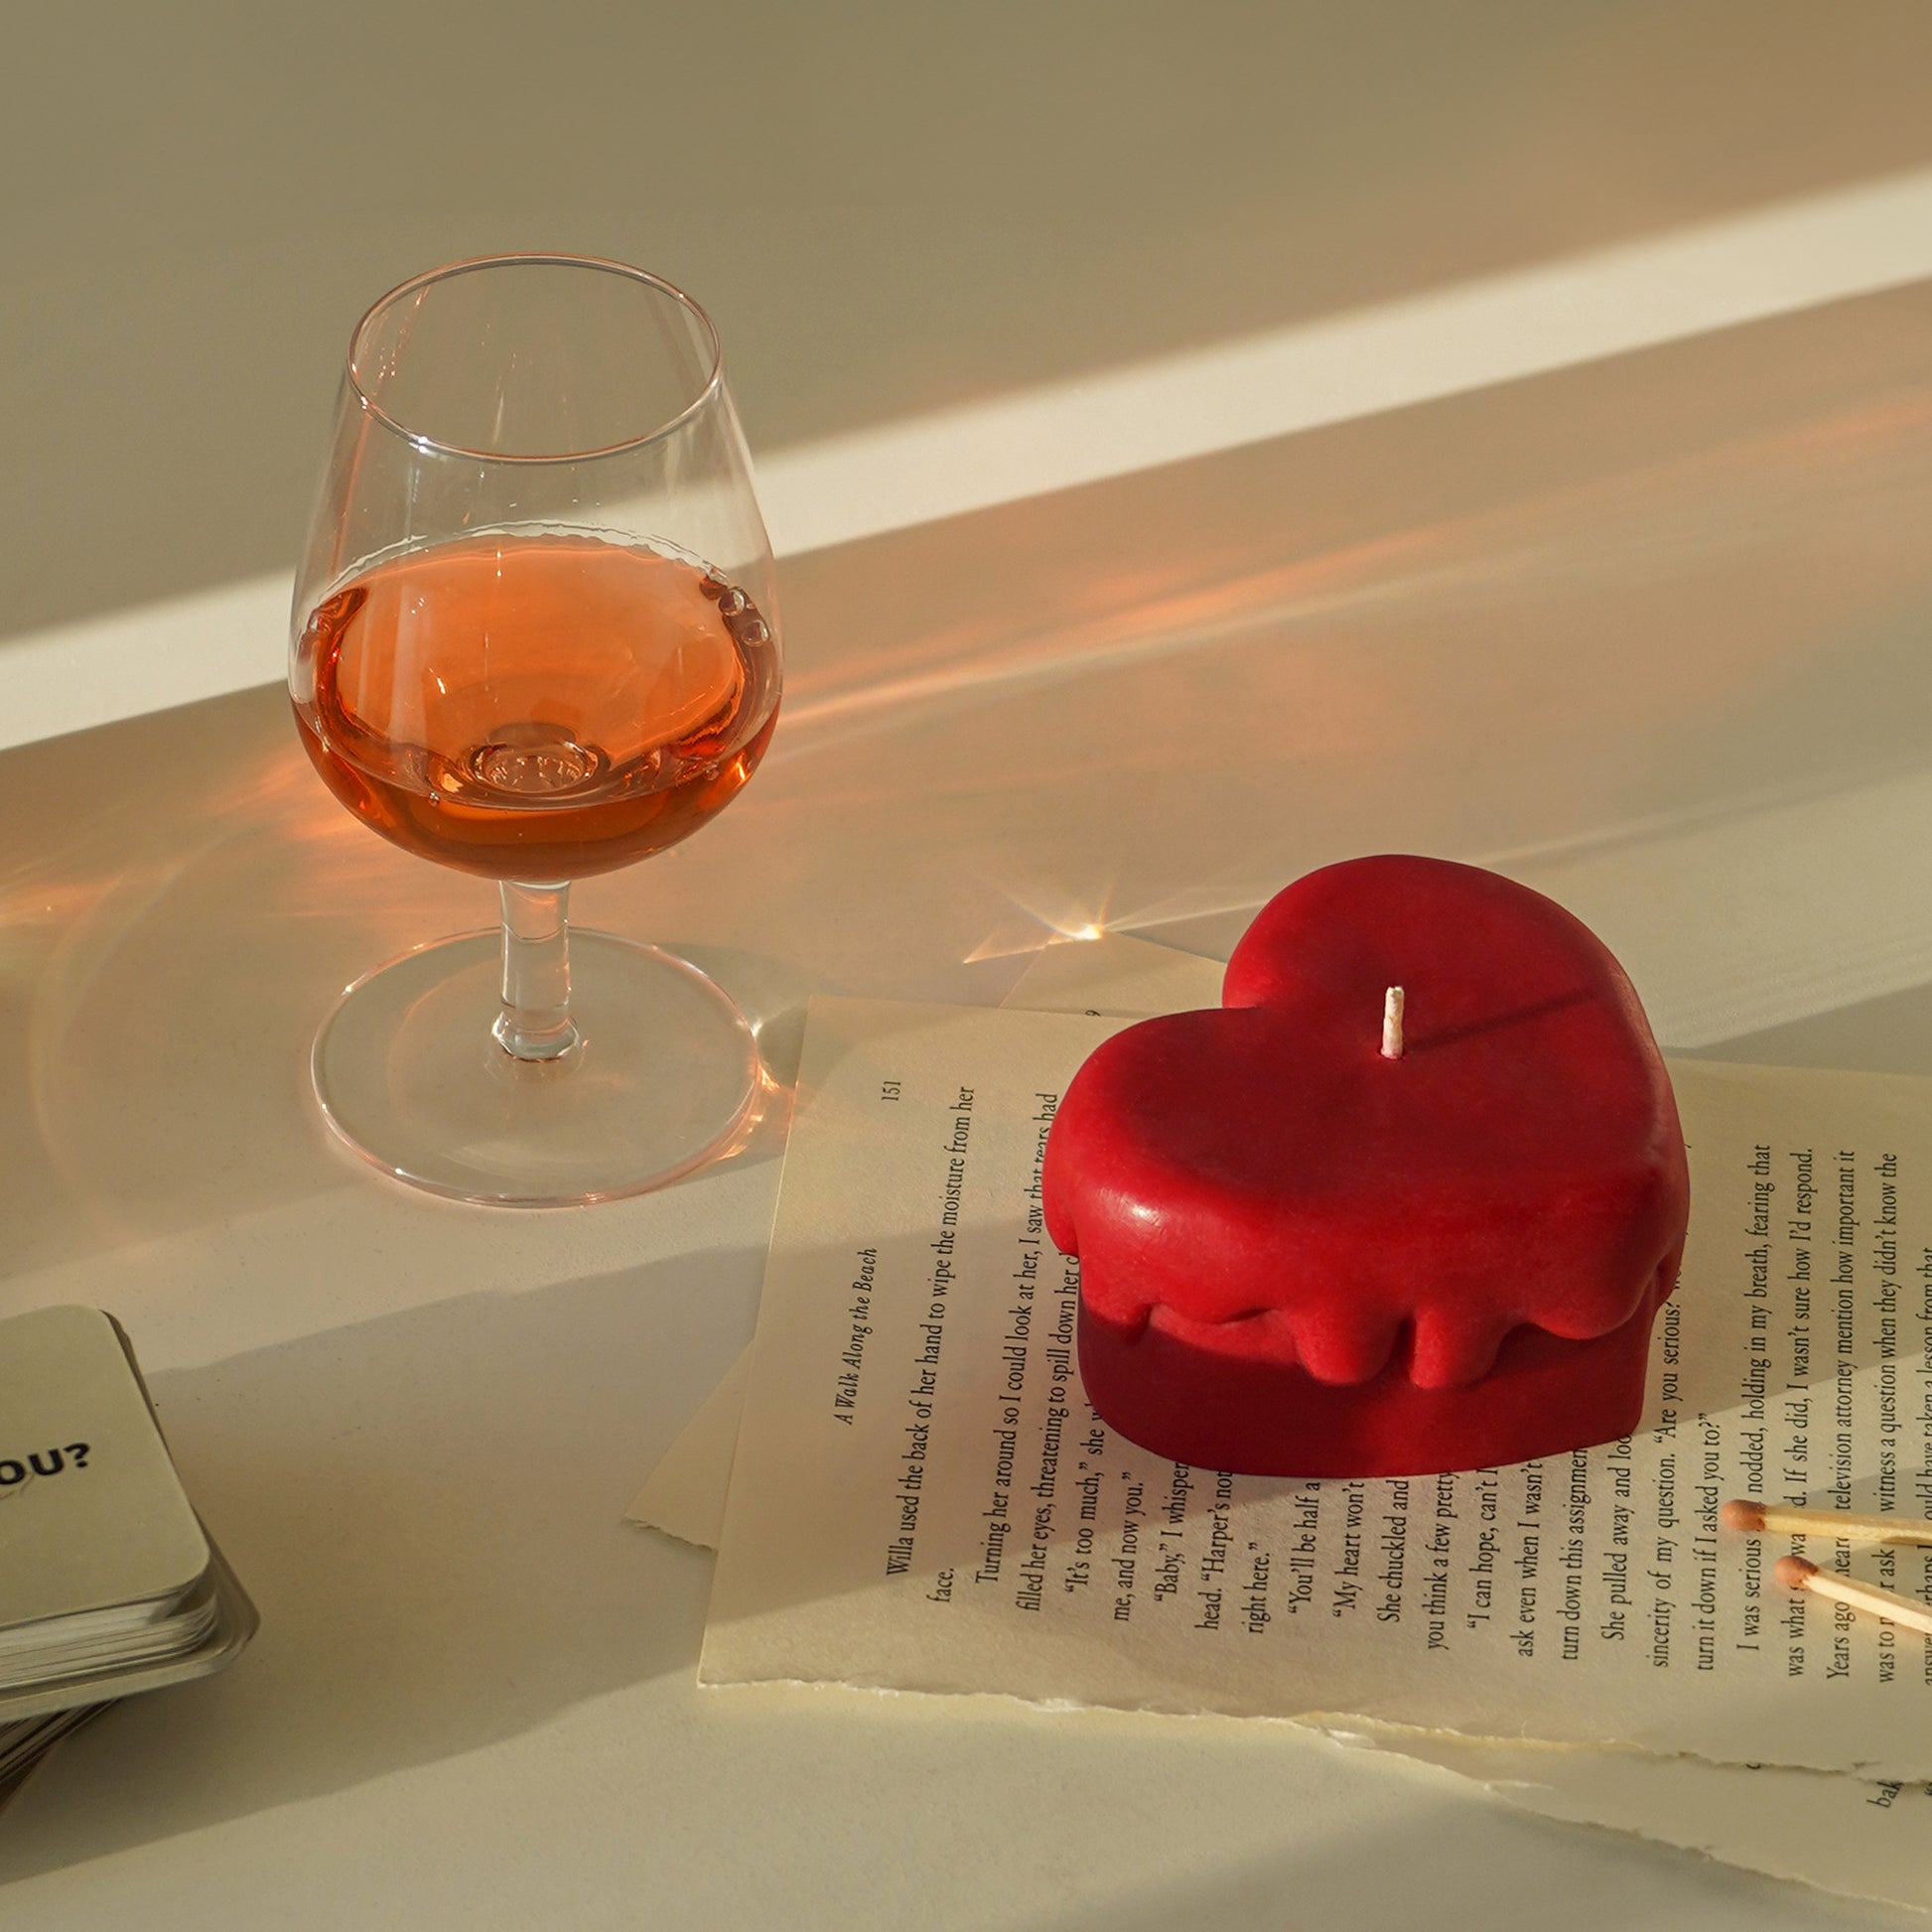 red melting heart candle on book pages and a glass of rose wine